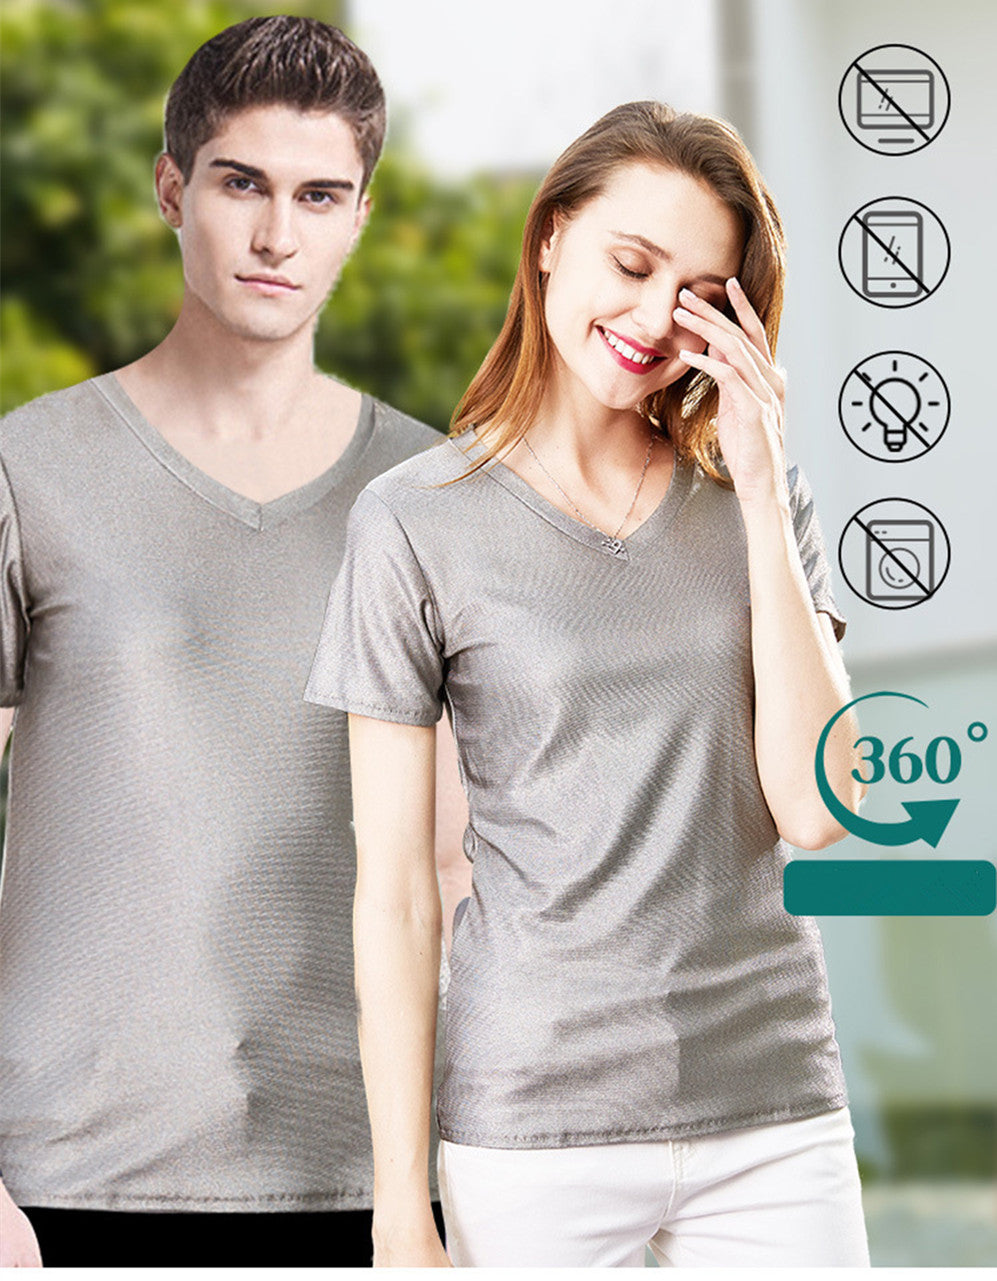 EMF Shielding Anti-Radiation Protection Men and Women Clothes T shirts for 5G